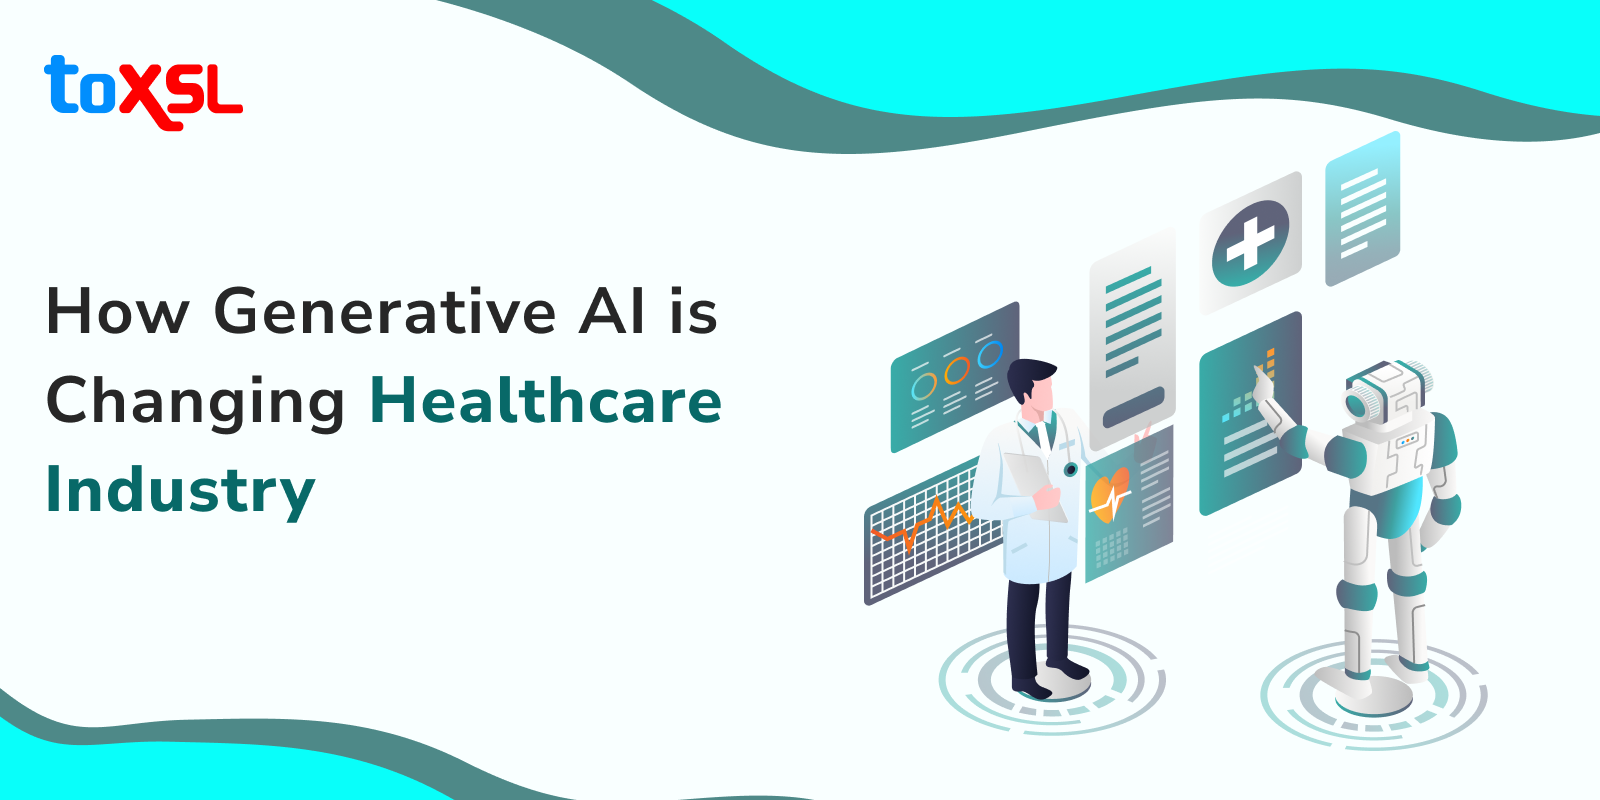 How Generative AI is Changing Healthcare Industry